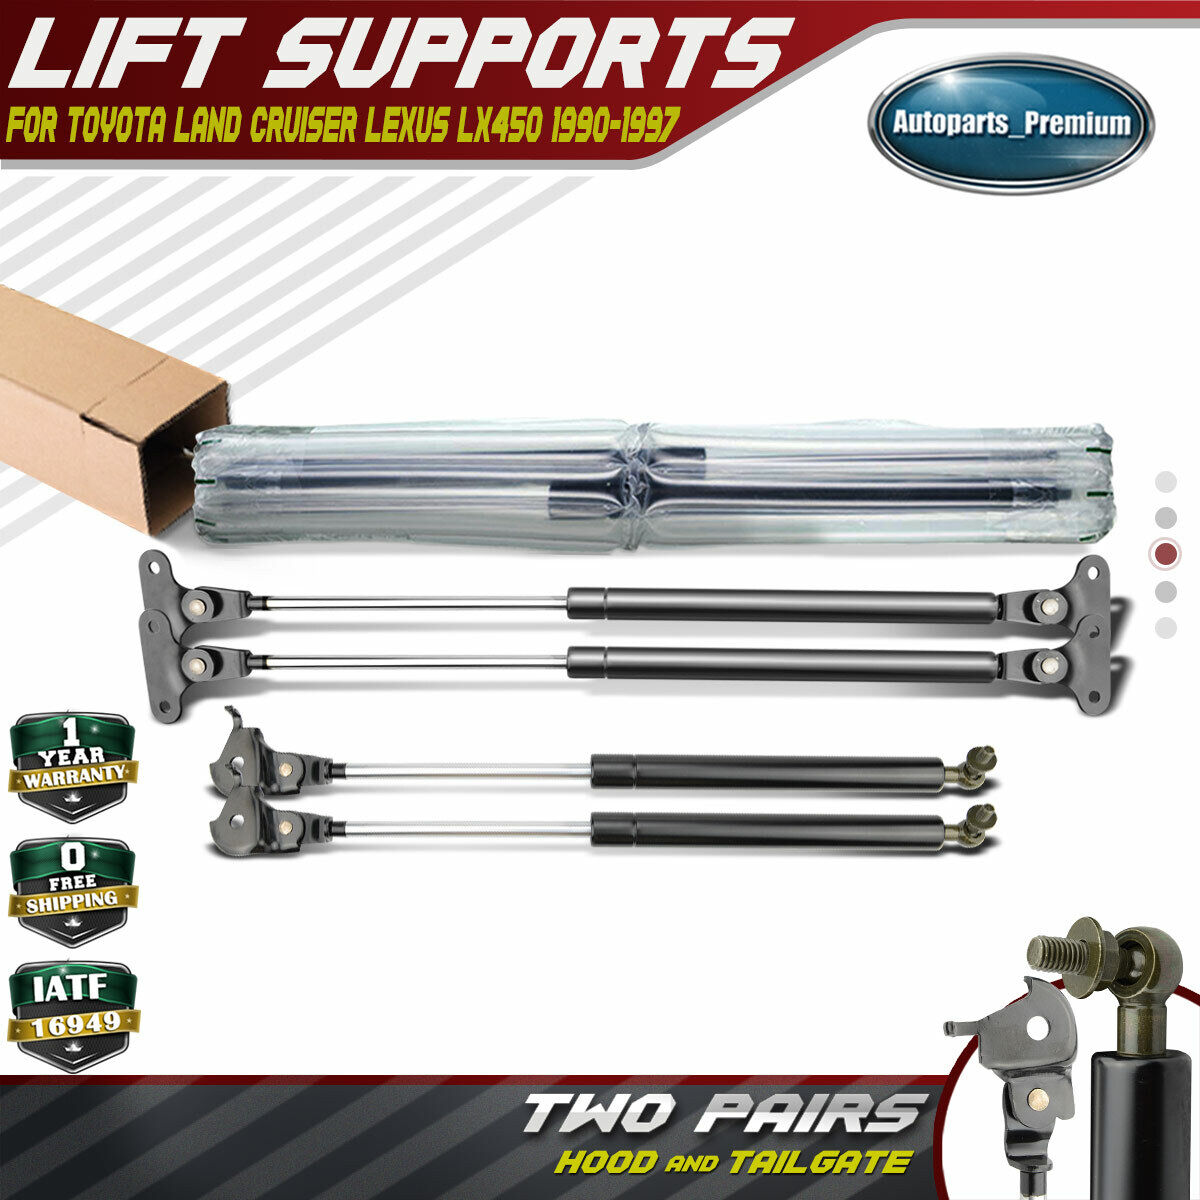 4x Hood+Tailgate Lift Supports Shock Struts for Toyota Land Cruiser 90-97 LX450